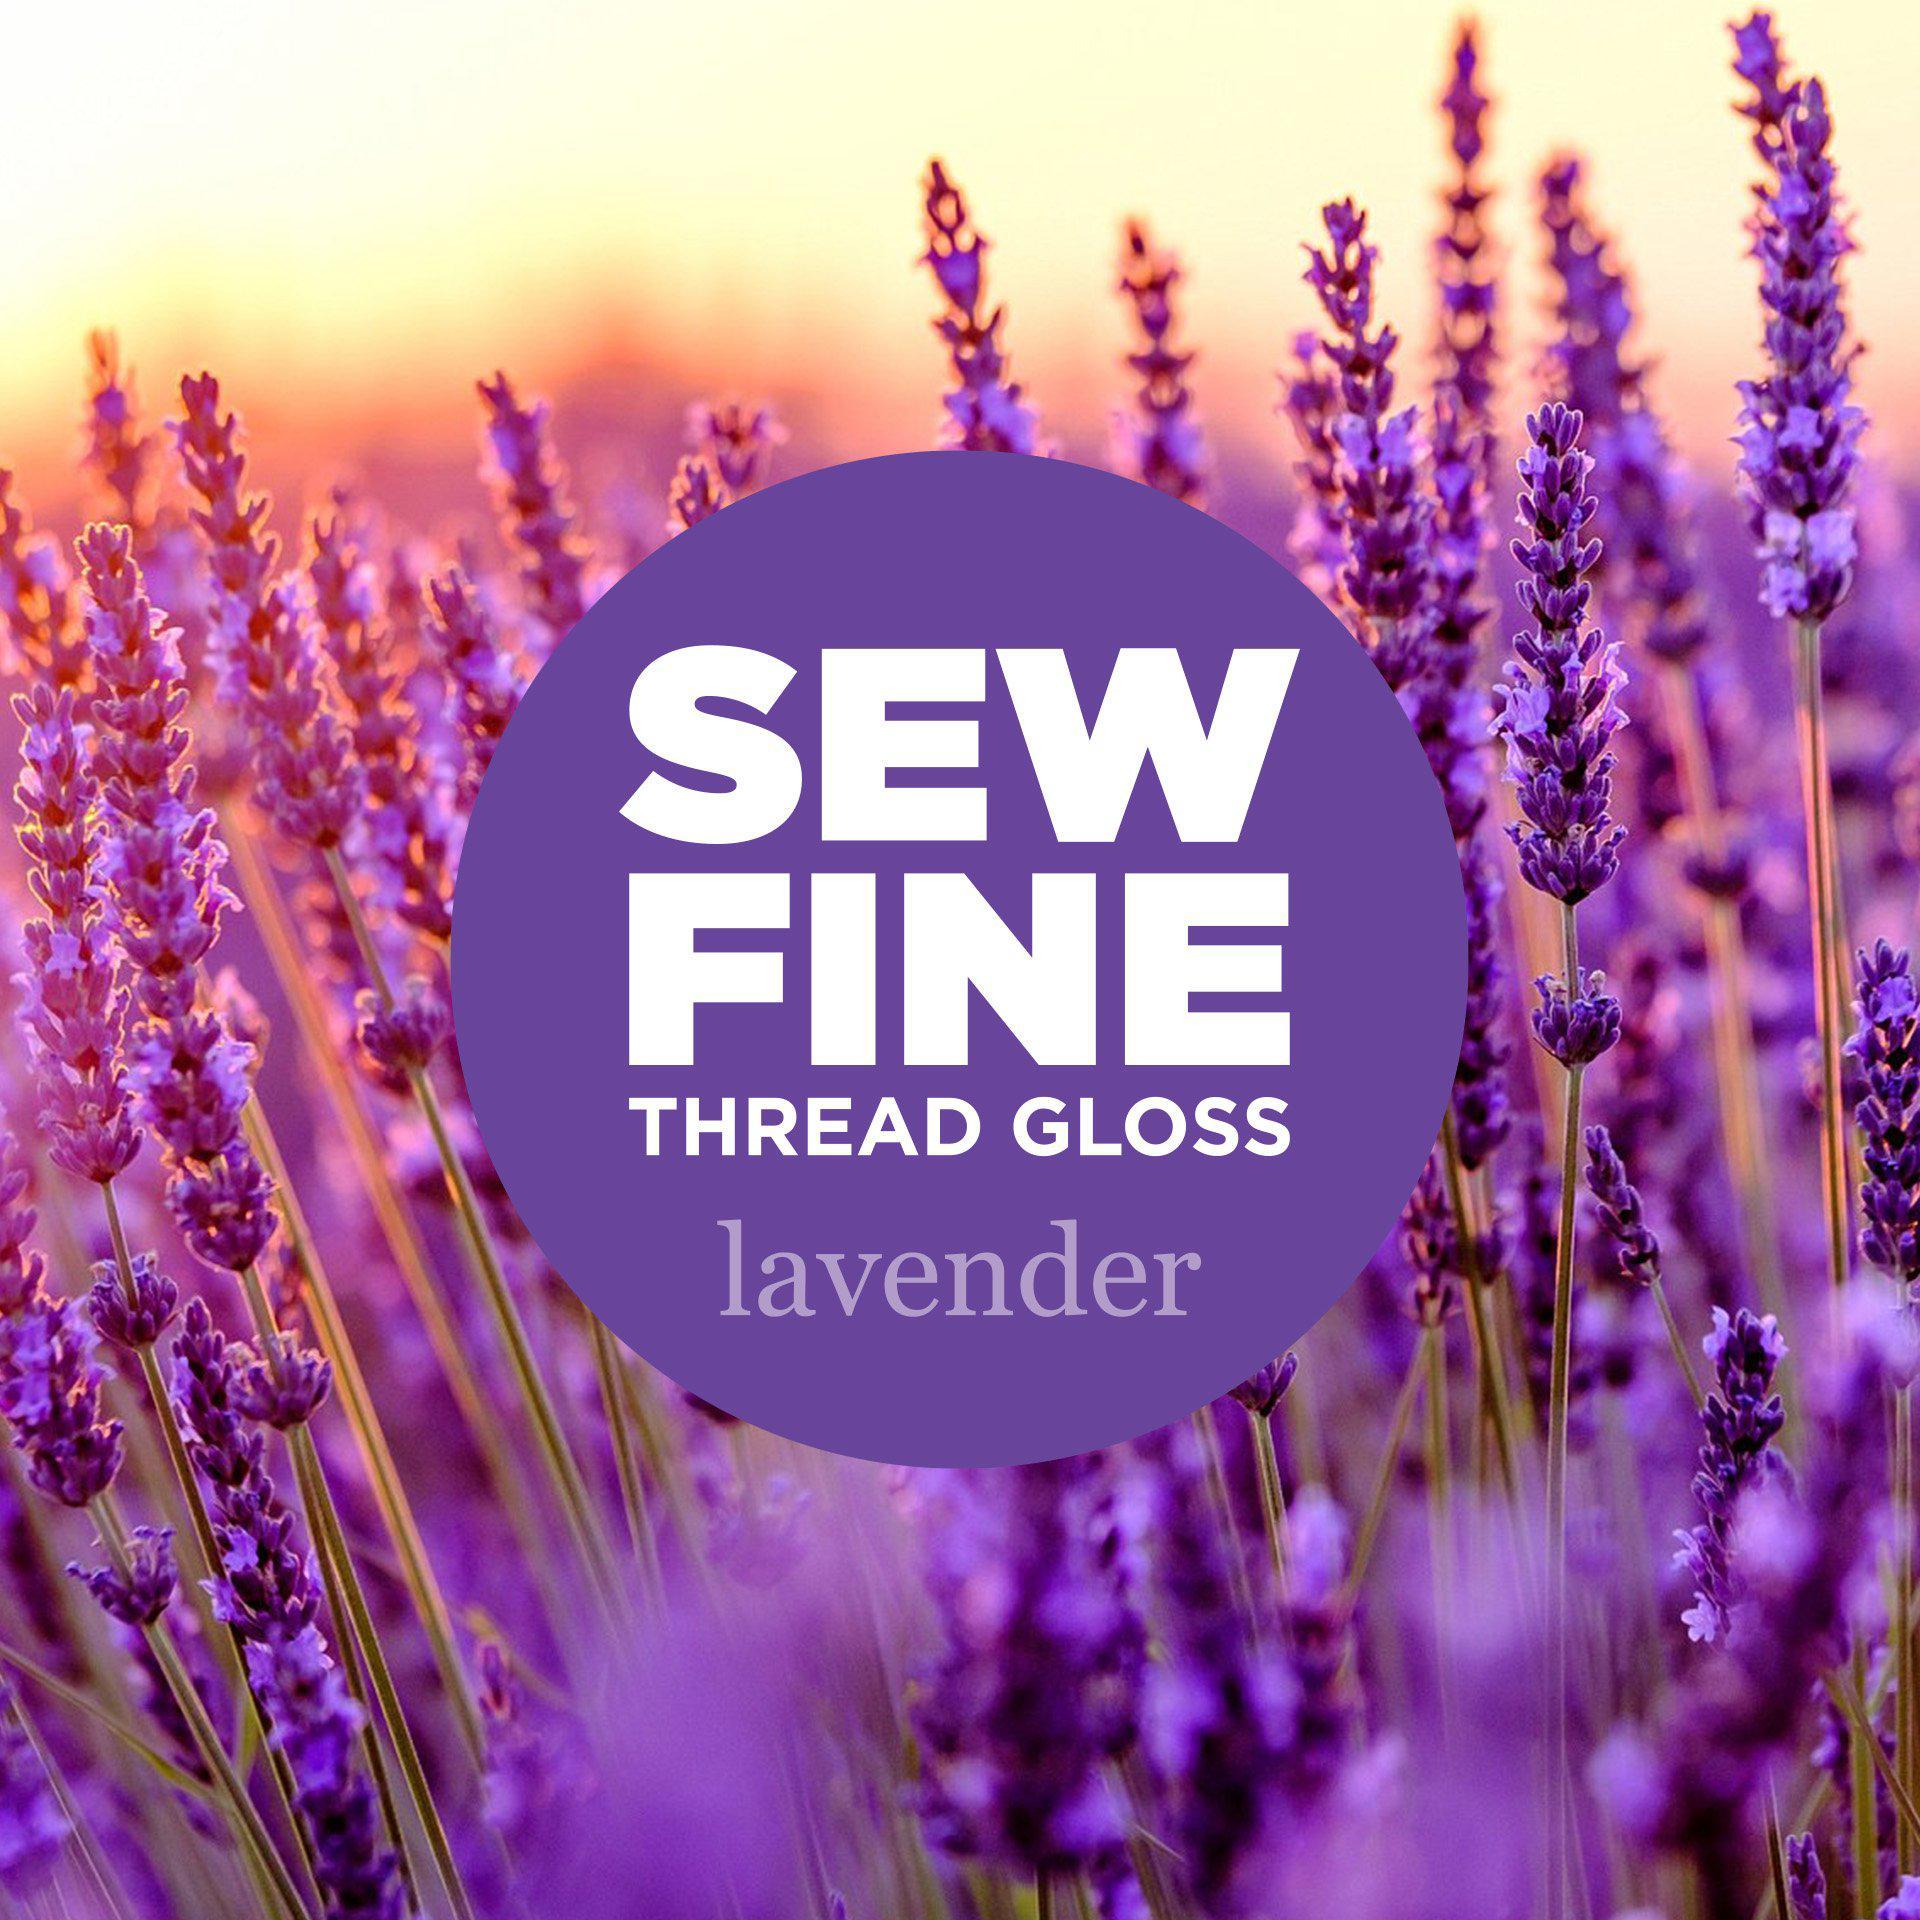 Sew Fine-Sew Fine Thread Gloss: Lavender-sewing notion-gather here online